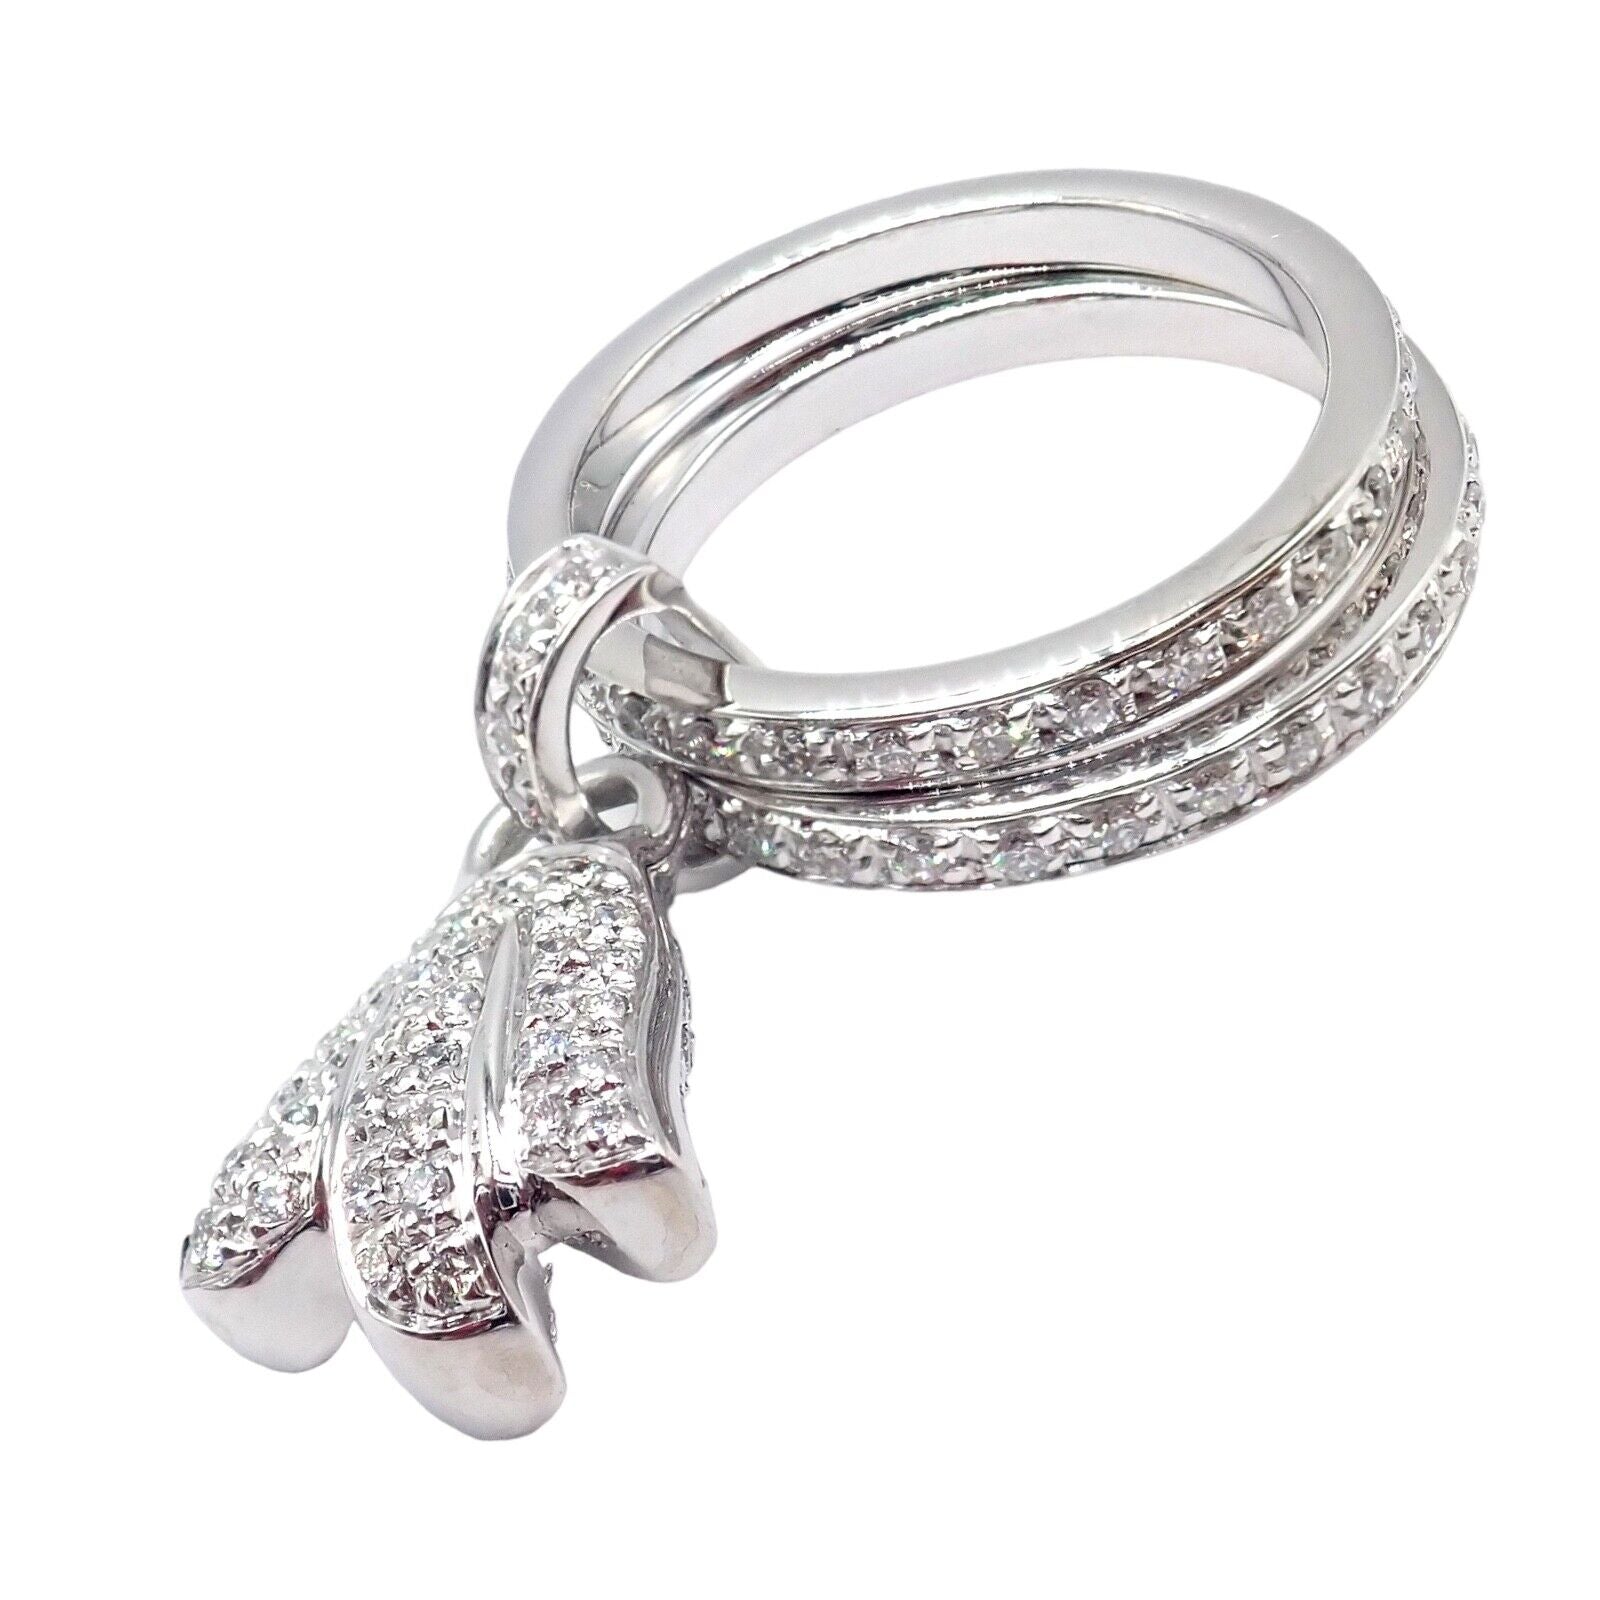 Piaget Jewelry & Watches:Fine Jewelry:Rings Authentic! Piaget 18k White Gold Diamond Double Band Flower Ring